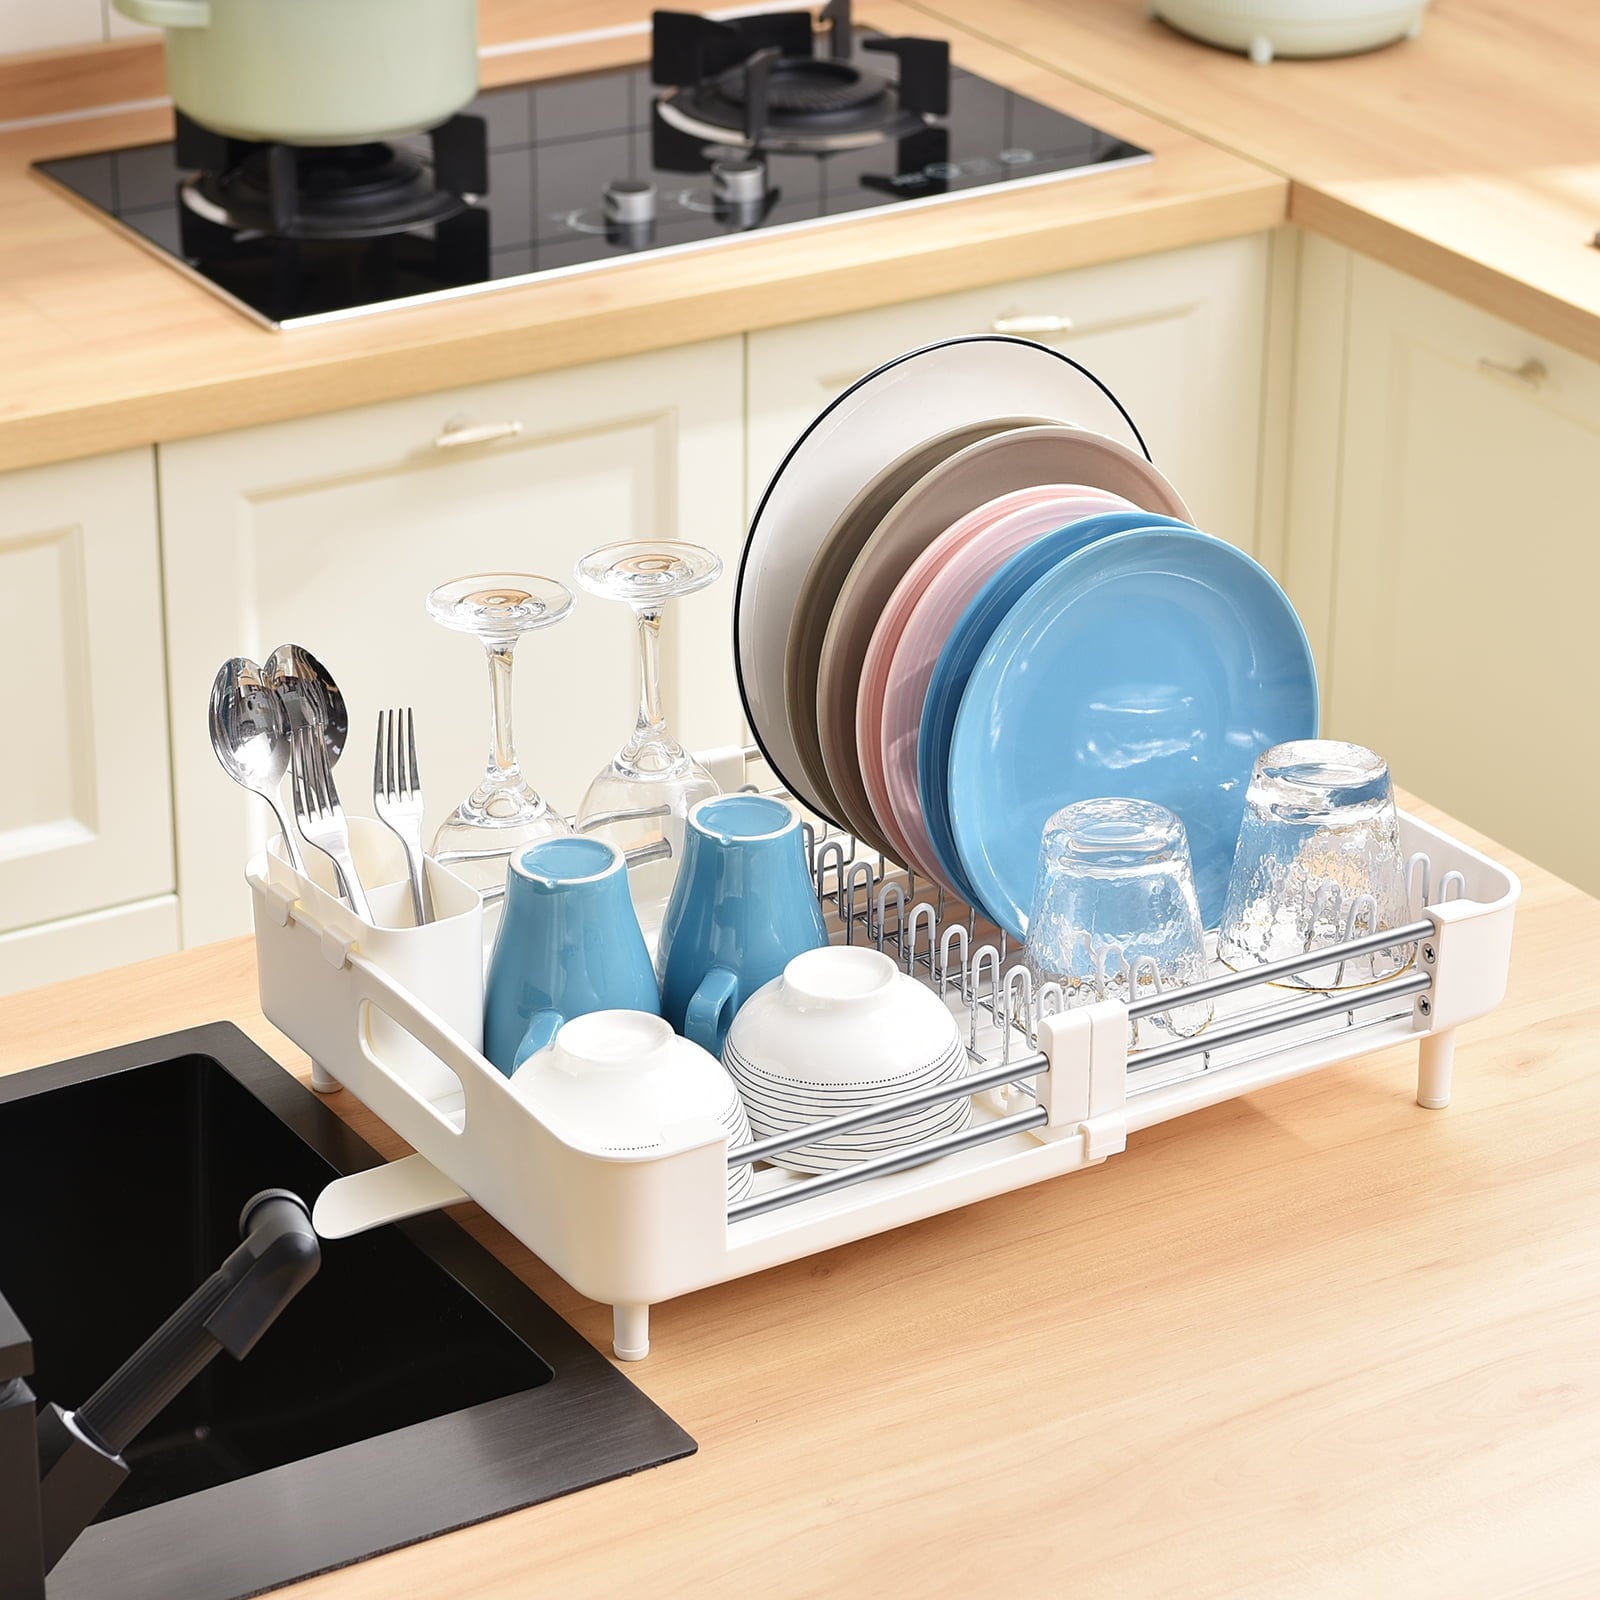 https://ak1.ostkcdn.com/images/products/is/images/direct/cc41fb633c526e0f174234c668dcb0f90490e4ef/Adjustable-Dish-Drying-Rack-for-Kitchen%2C-Foldable-Dish-Drainer-with-Black.jpg